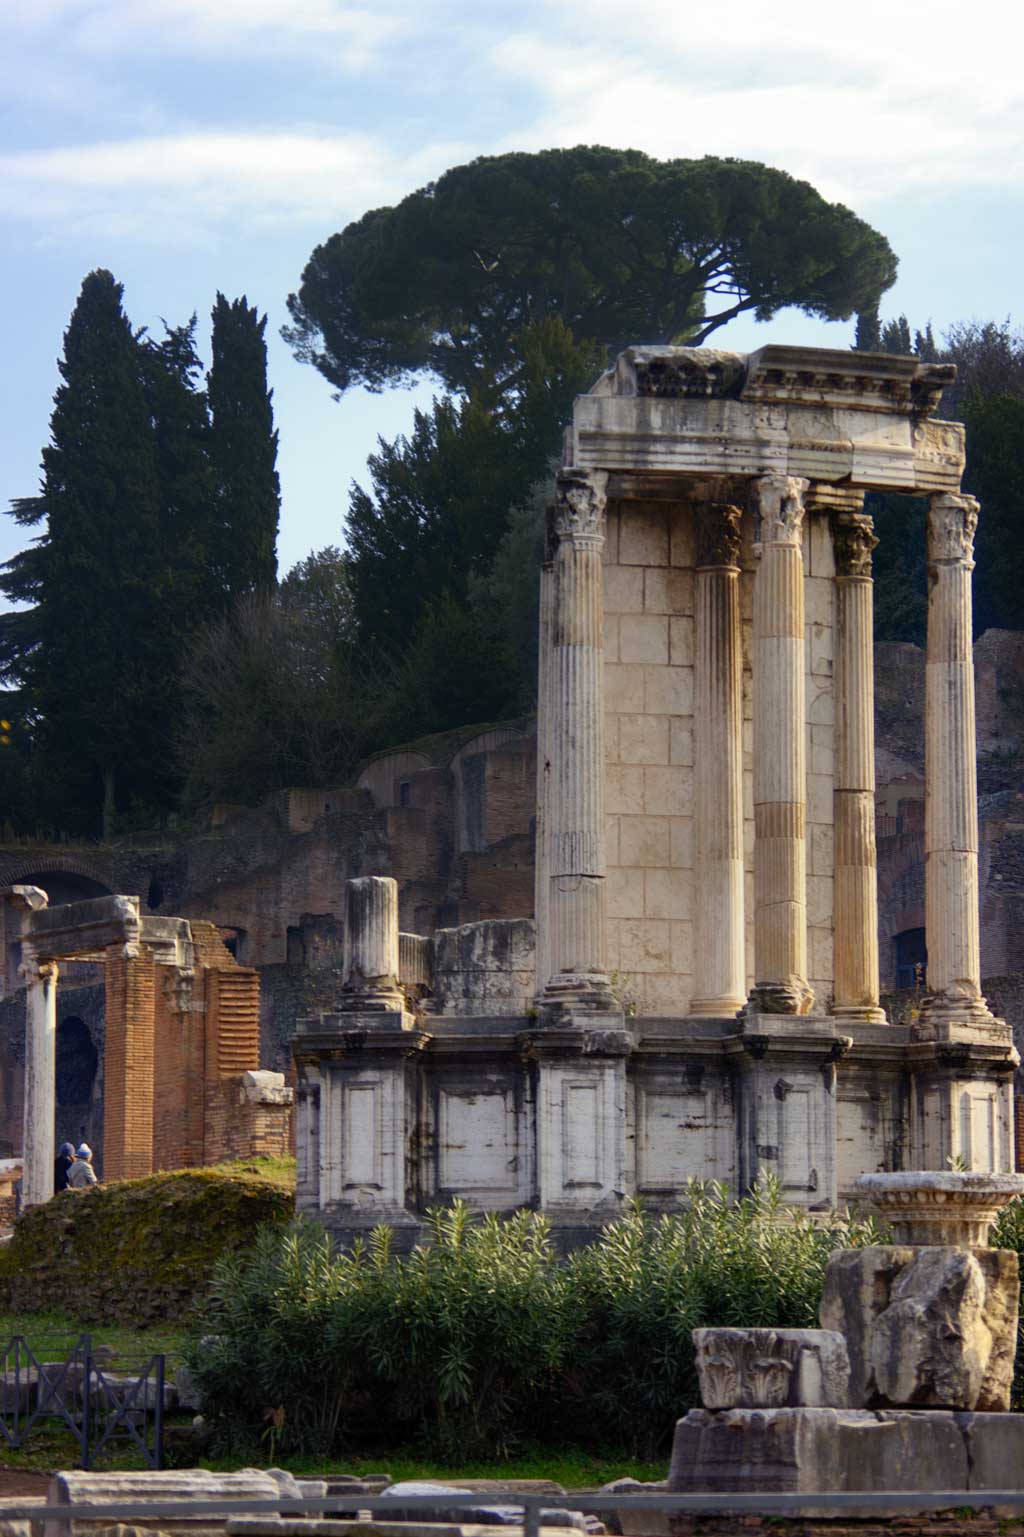 Picture of the marble column remains from the Temple of the Vestal Virgins in Rome, Italy.